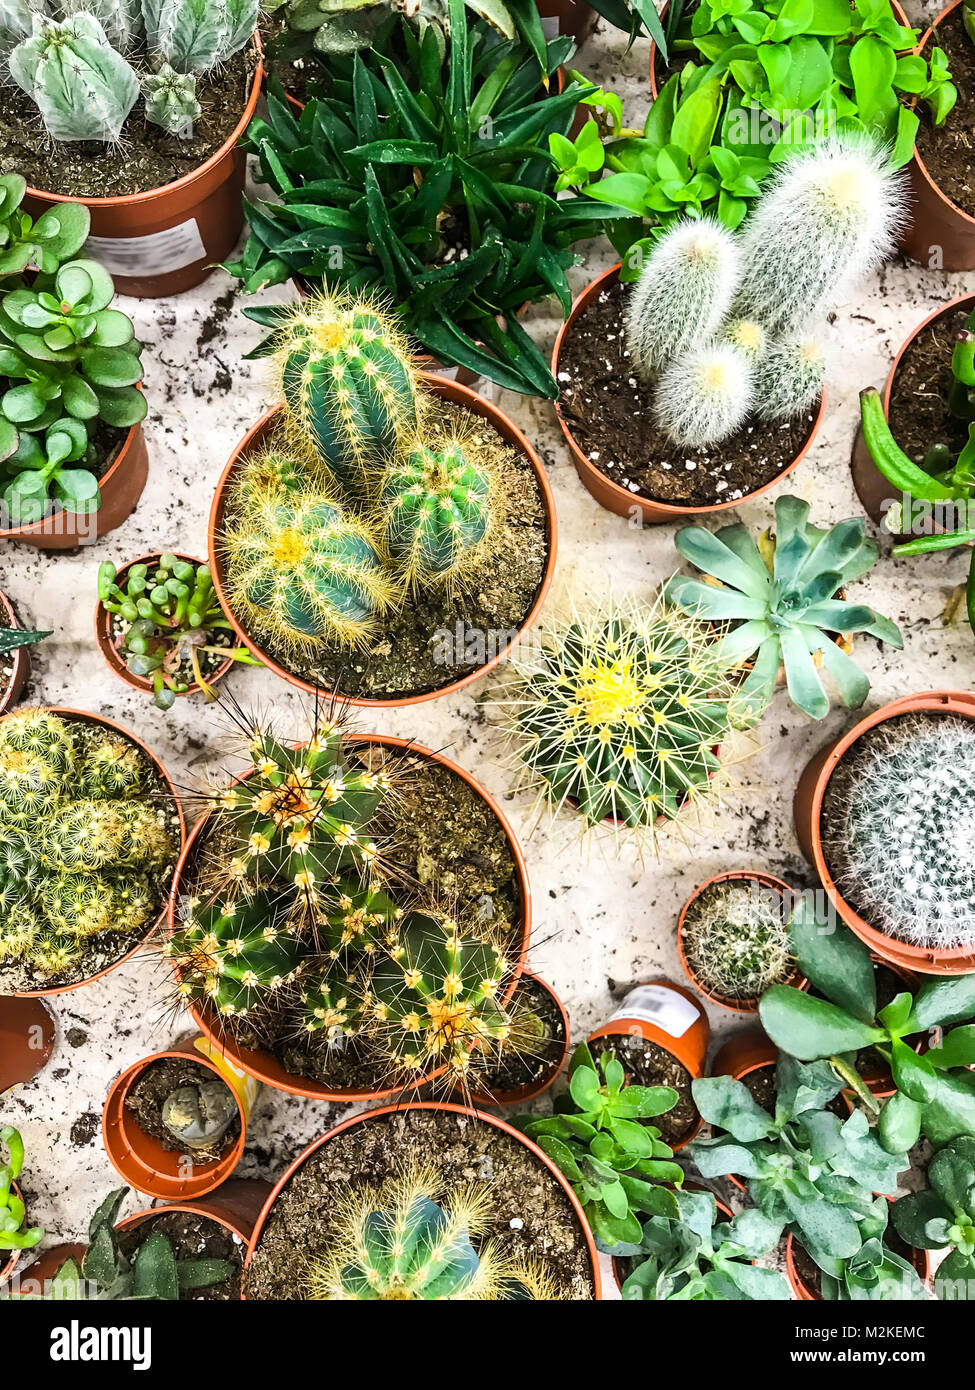 Cacti and succulents in pots on the table Stock Photo